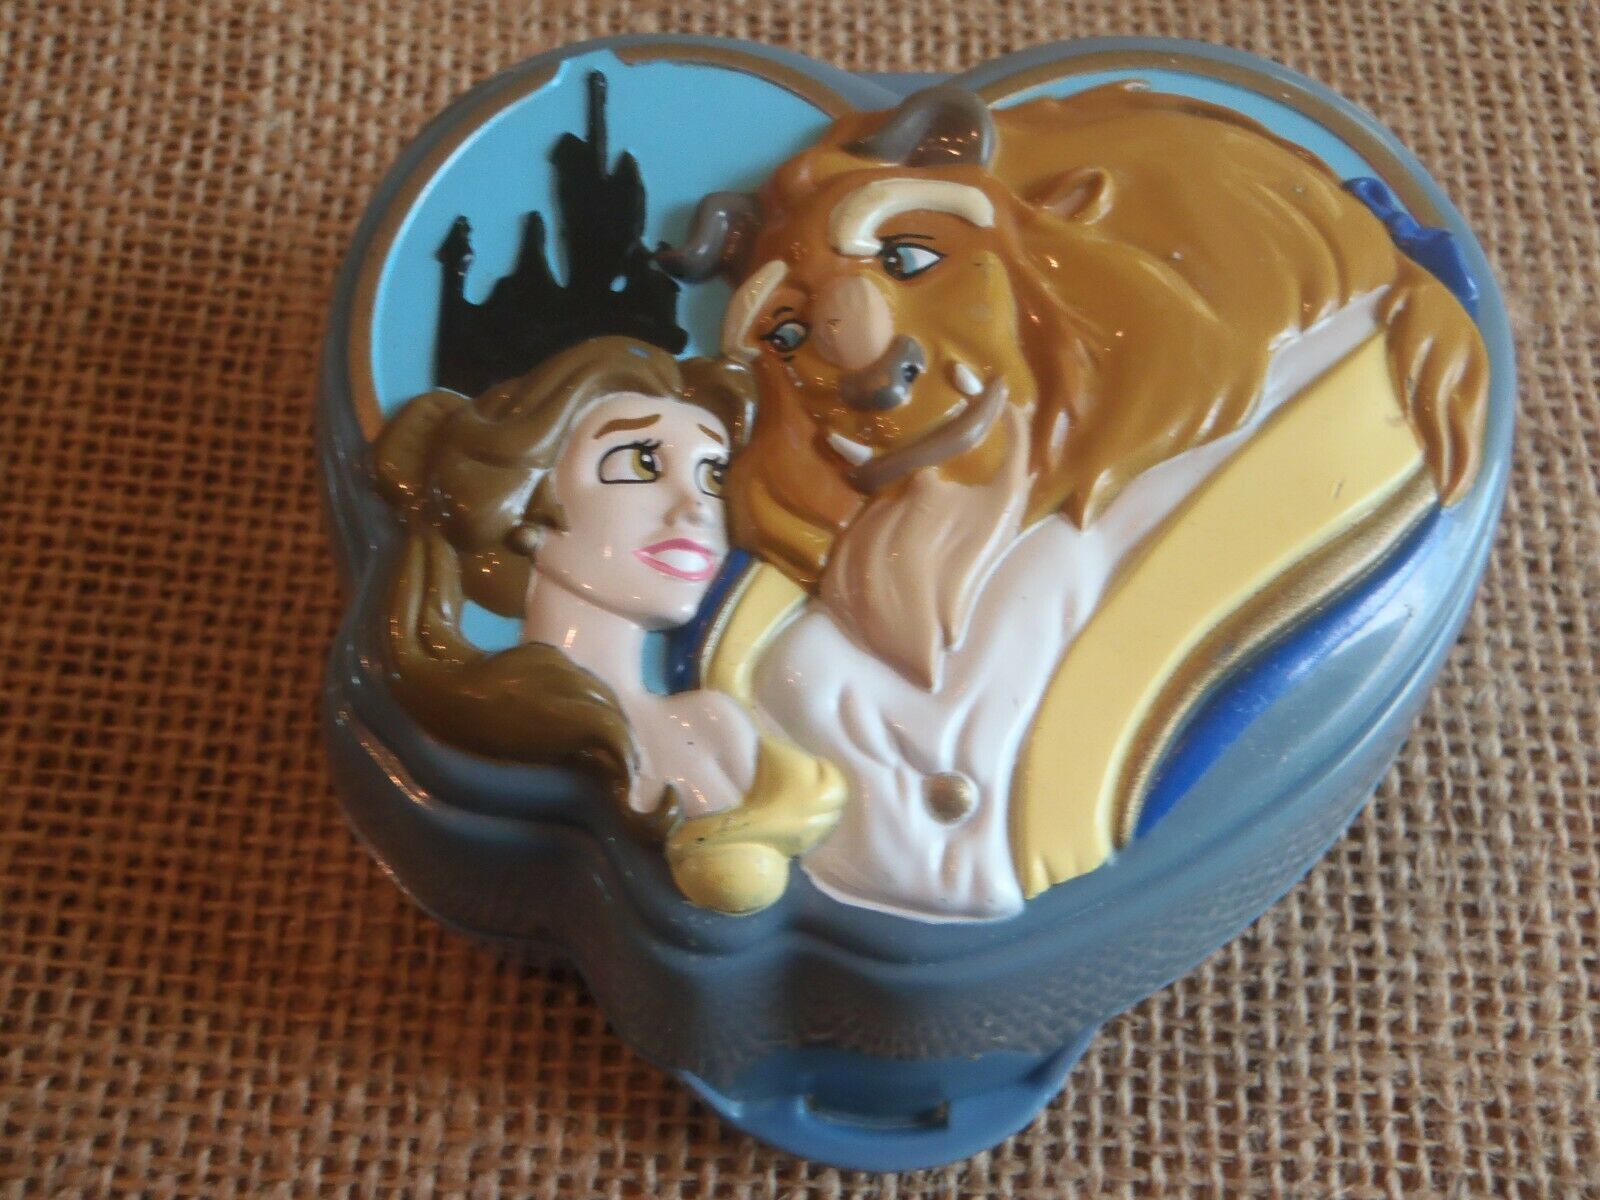 Vintage Polly Pocket Bluebird 1995 Beauty & The Beast Playcase Compact Only